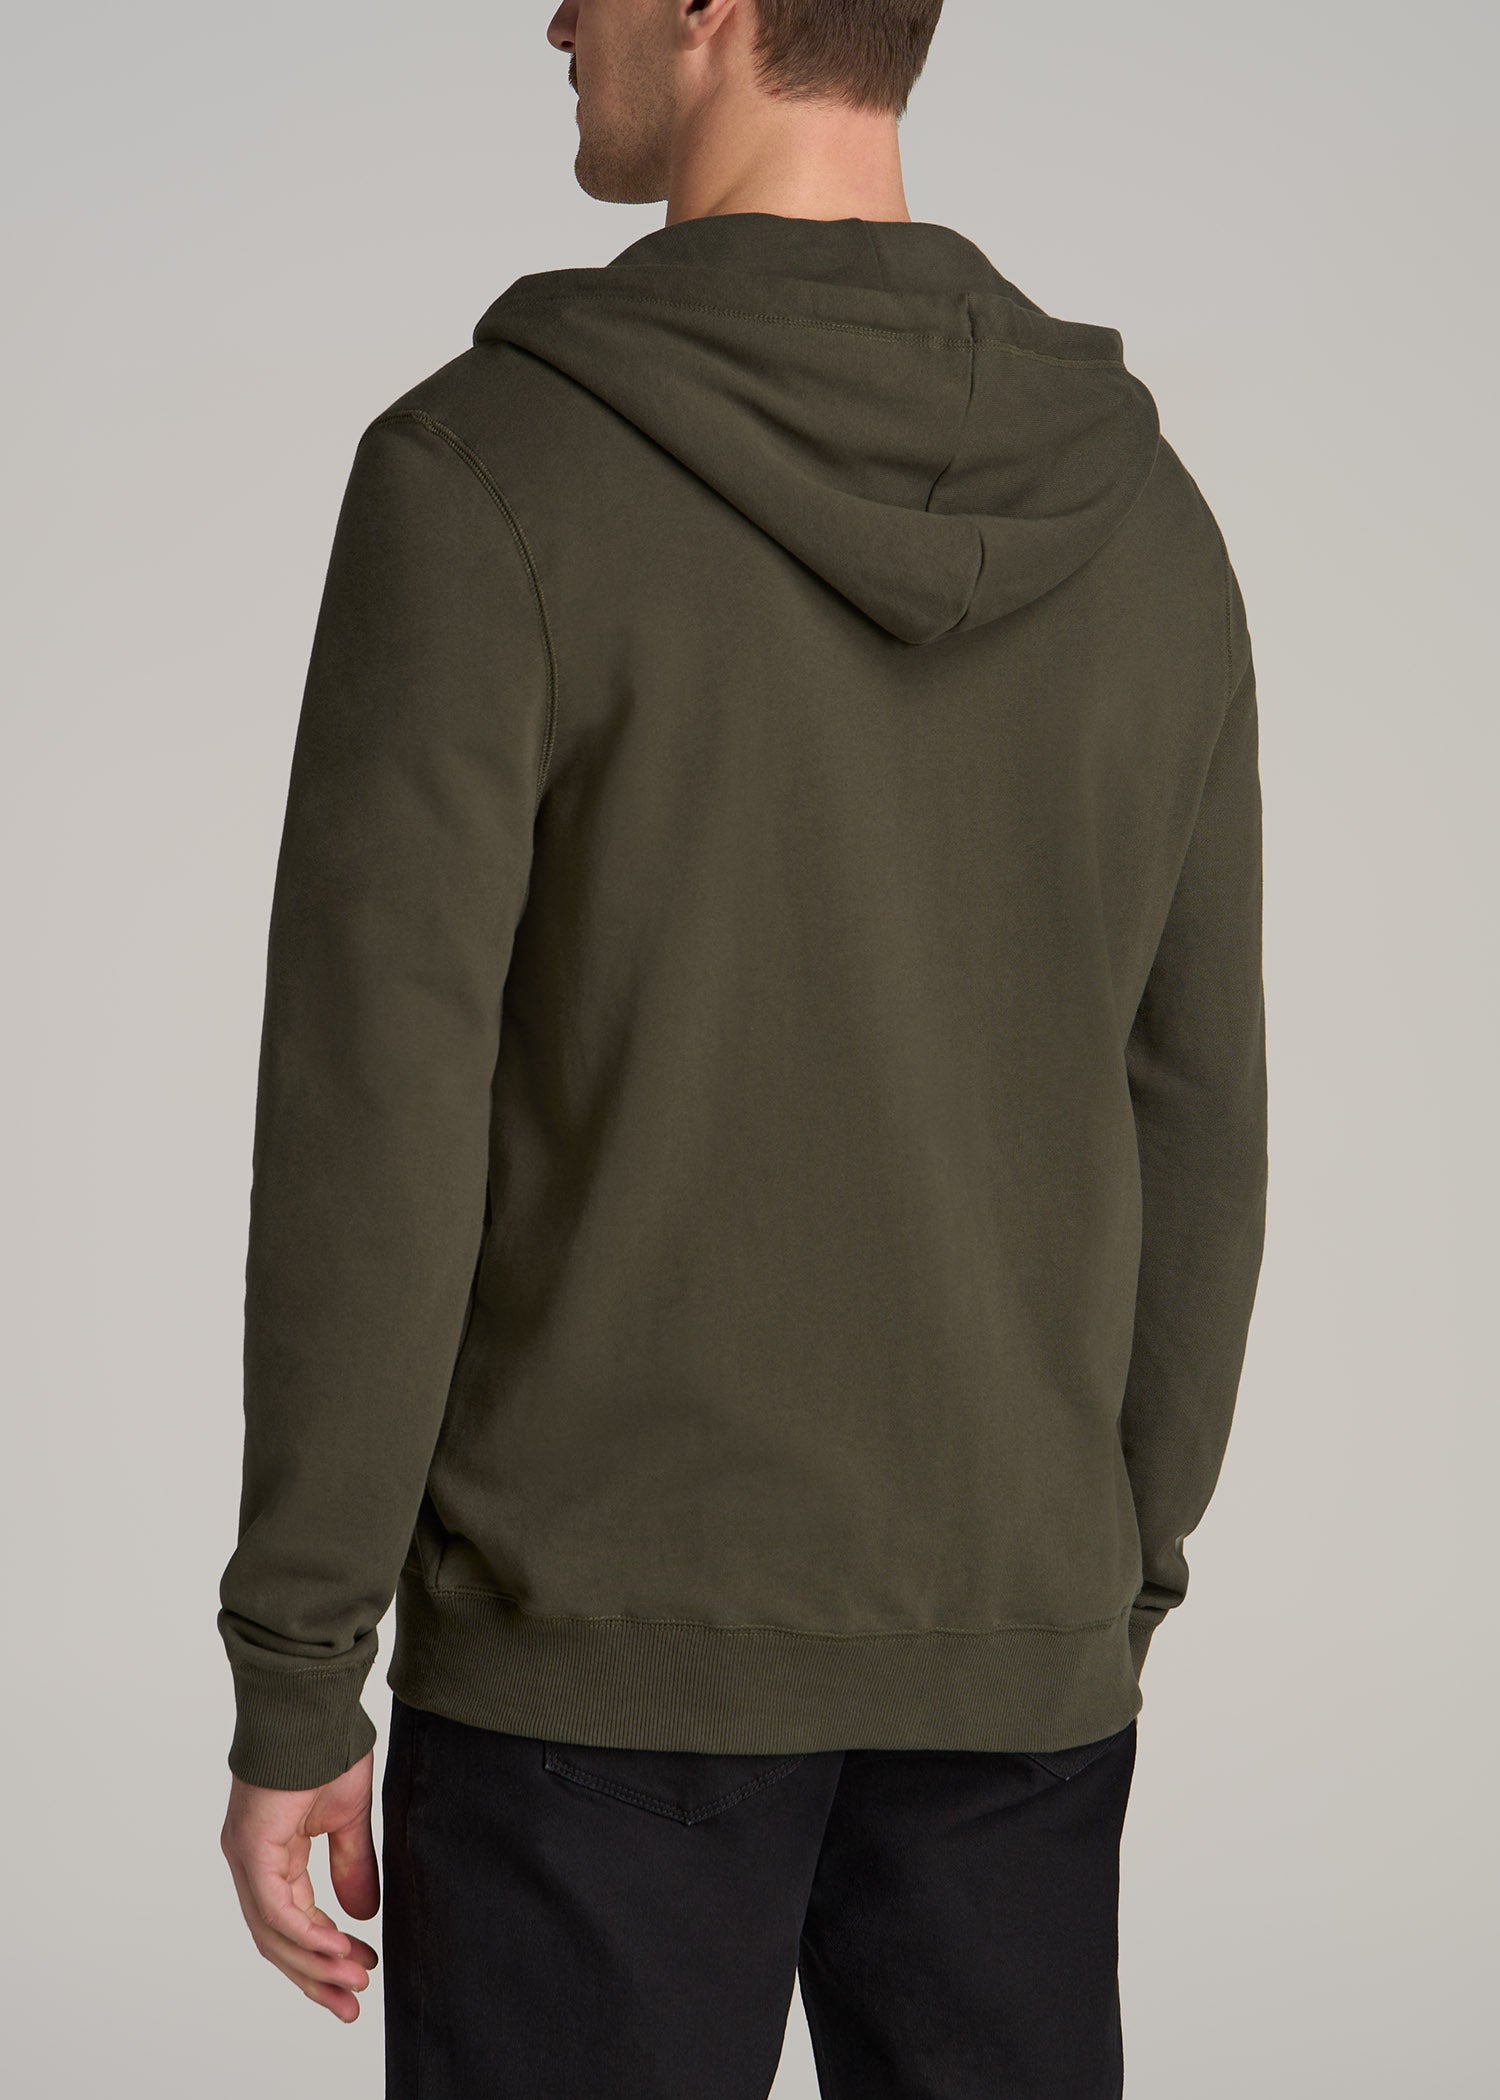 Men's Tall French Terry Zip Camo Green Hoodie | American Tall